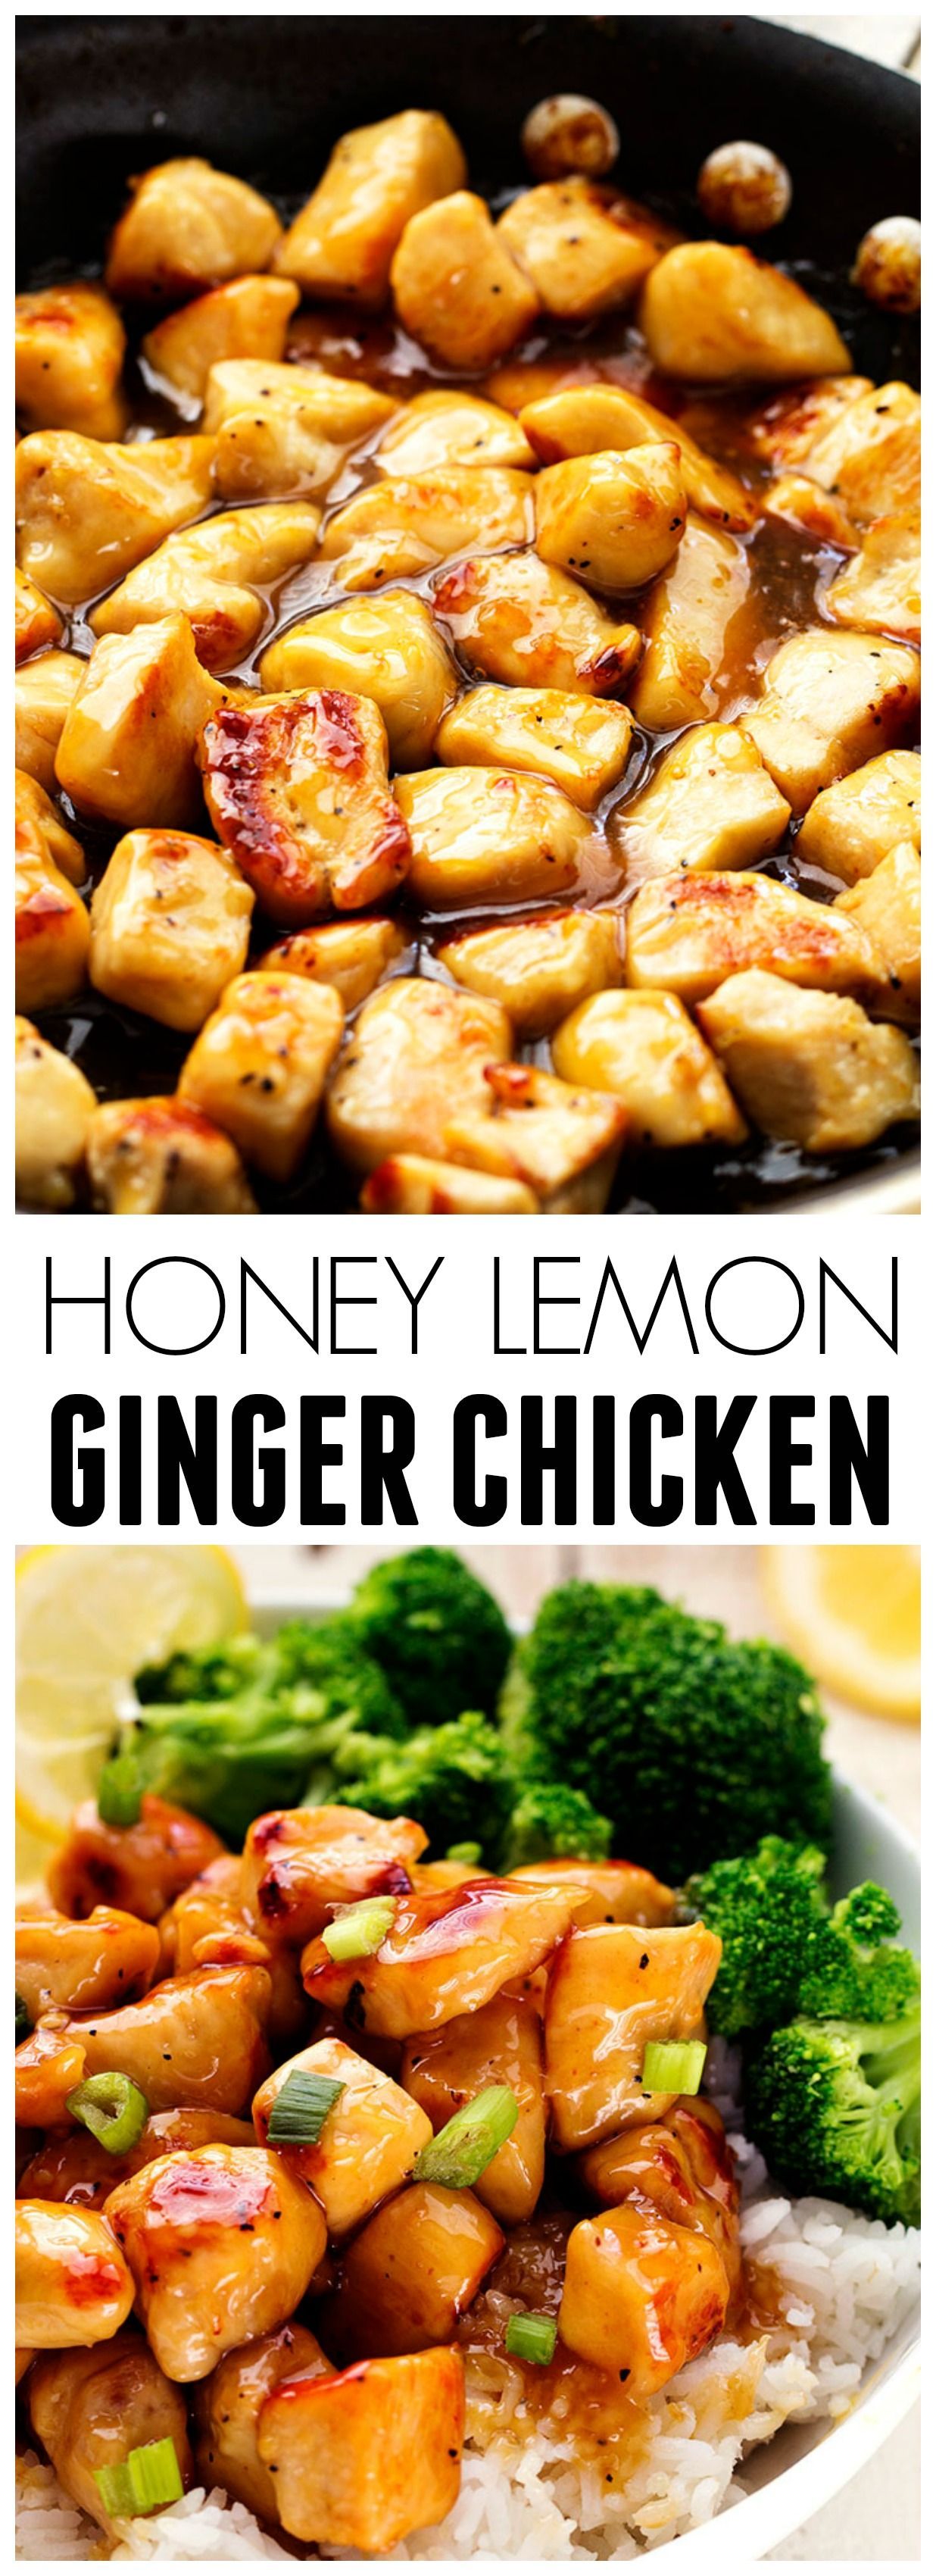 This Honey Lemon Ginger Chicken is light and ready in under 30 minutes! The flavor is out of this world good!